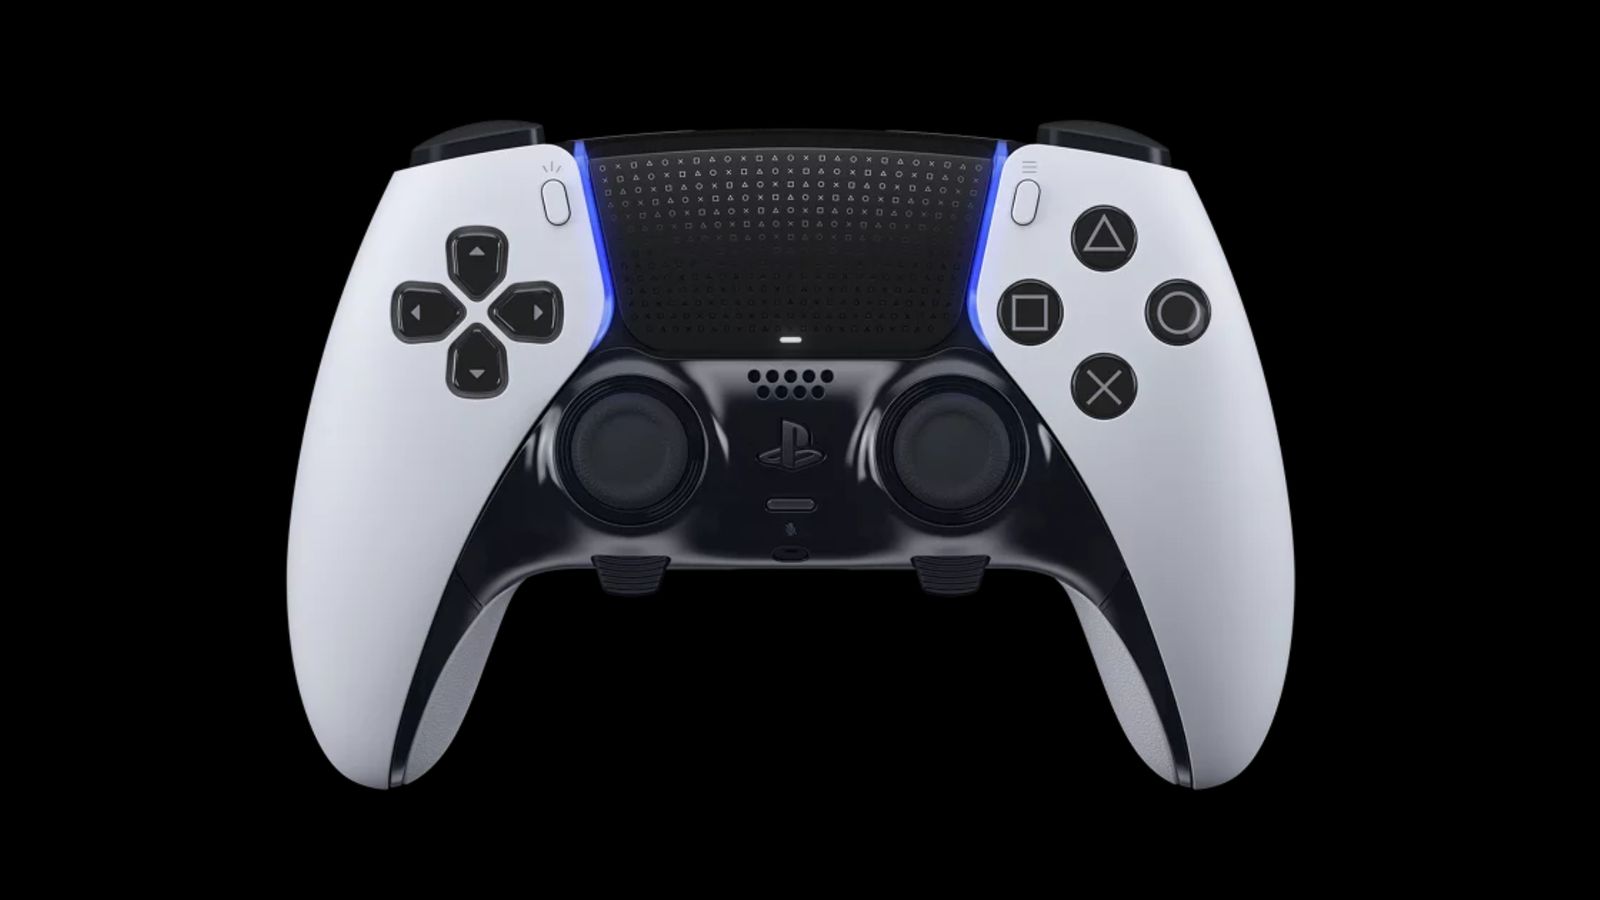 Sony DualSense Edge product image of a white and black gamepad with blue lighting.